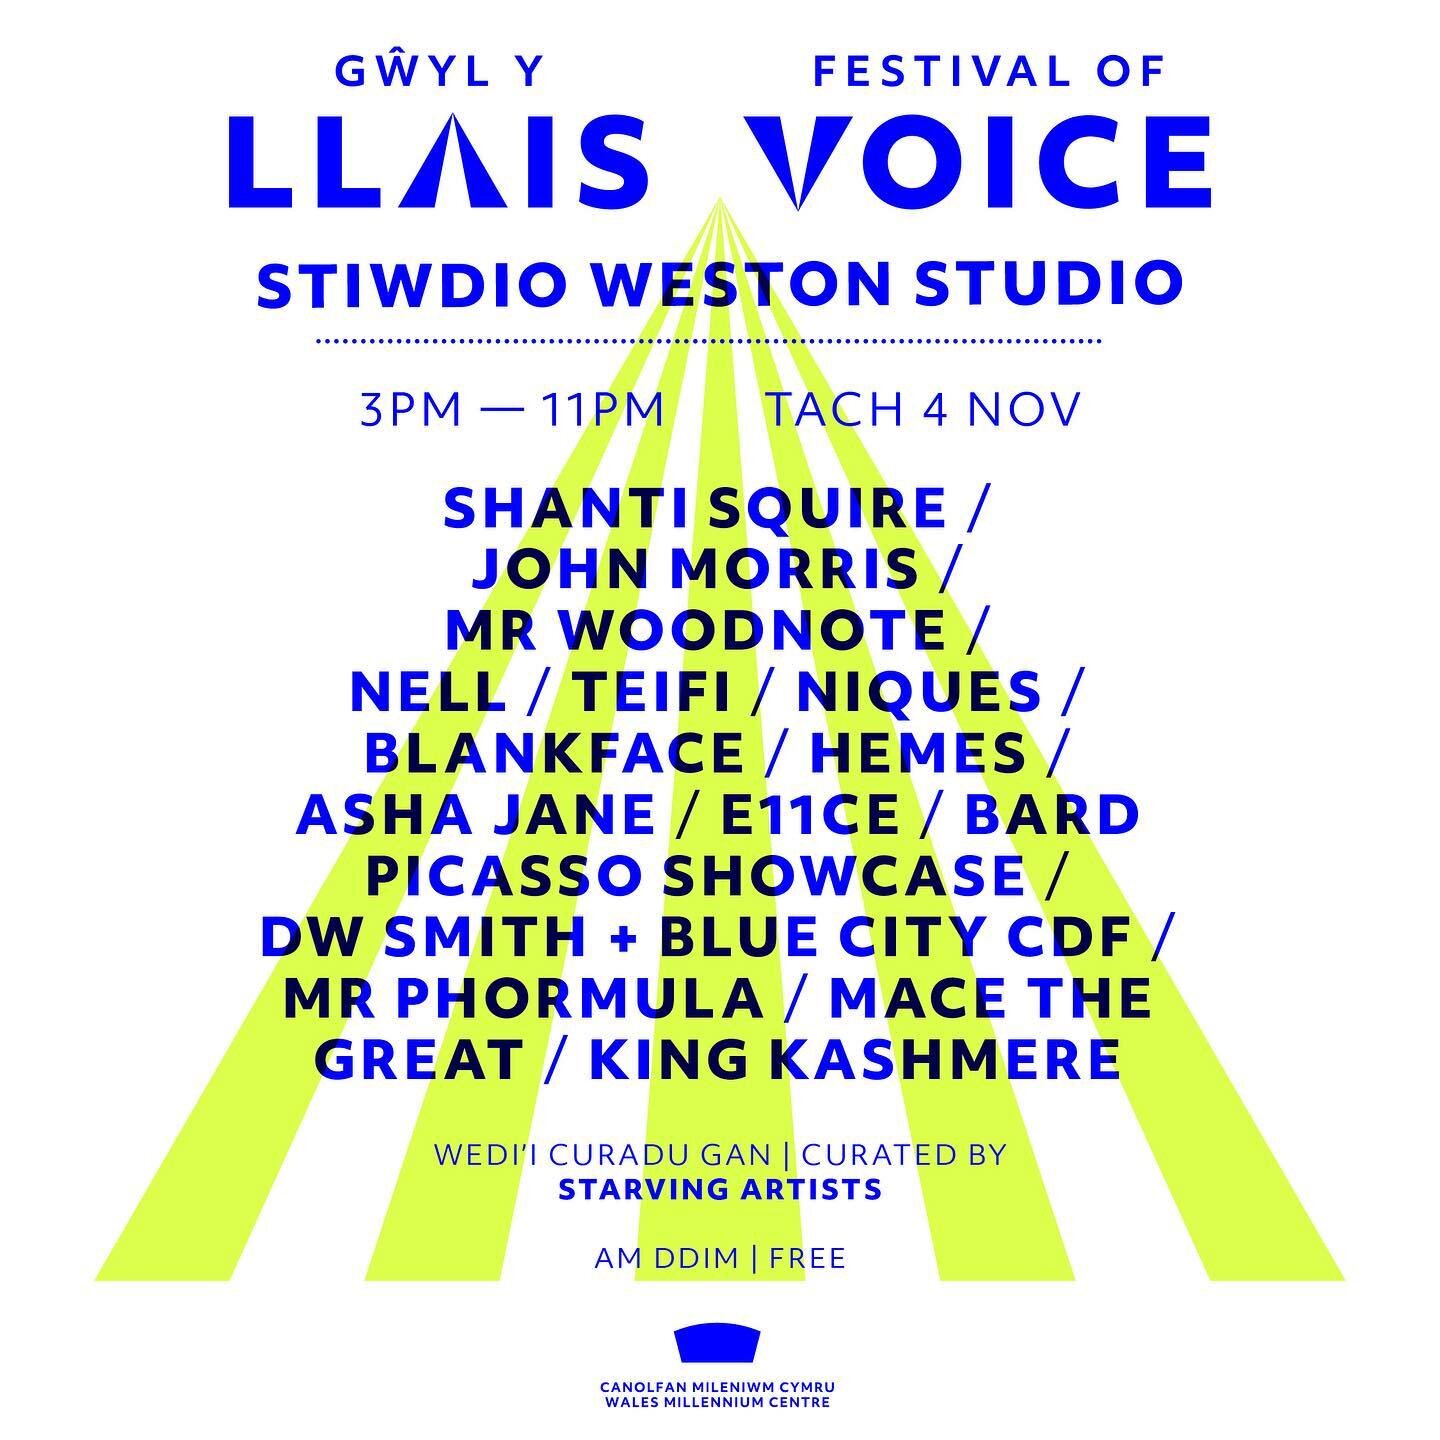 Incoming&hellip;.. 🔥🔥🔥@festivalofvoice_gwylyllais 🎶 💥 💯FREE EVENT 💥

Talks/Poetry/Soul/Hip-hop/Grime

Join us in celebrating some of Wales' finest creatives curated by Starving Artists!'Up and Cymru' features some thought-provoking talks, led 